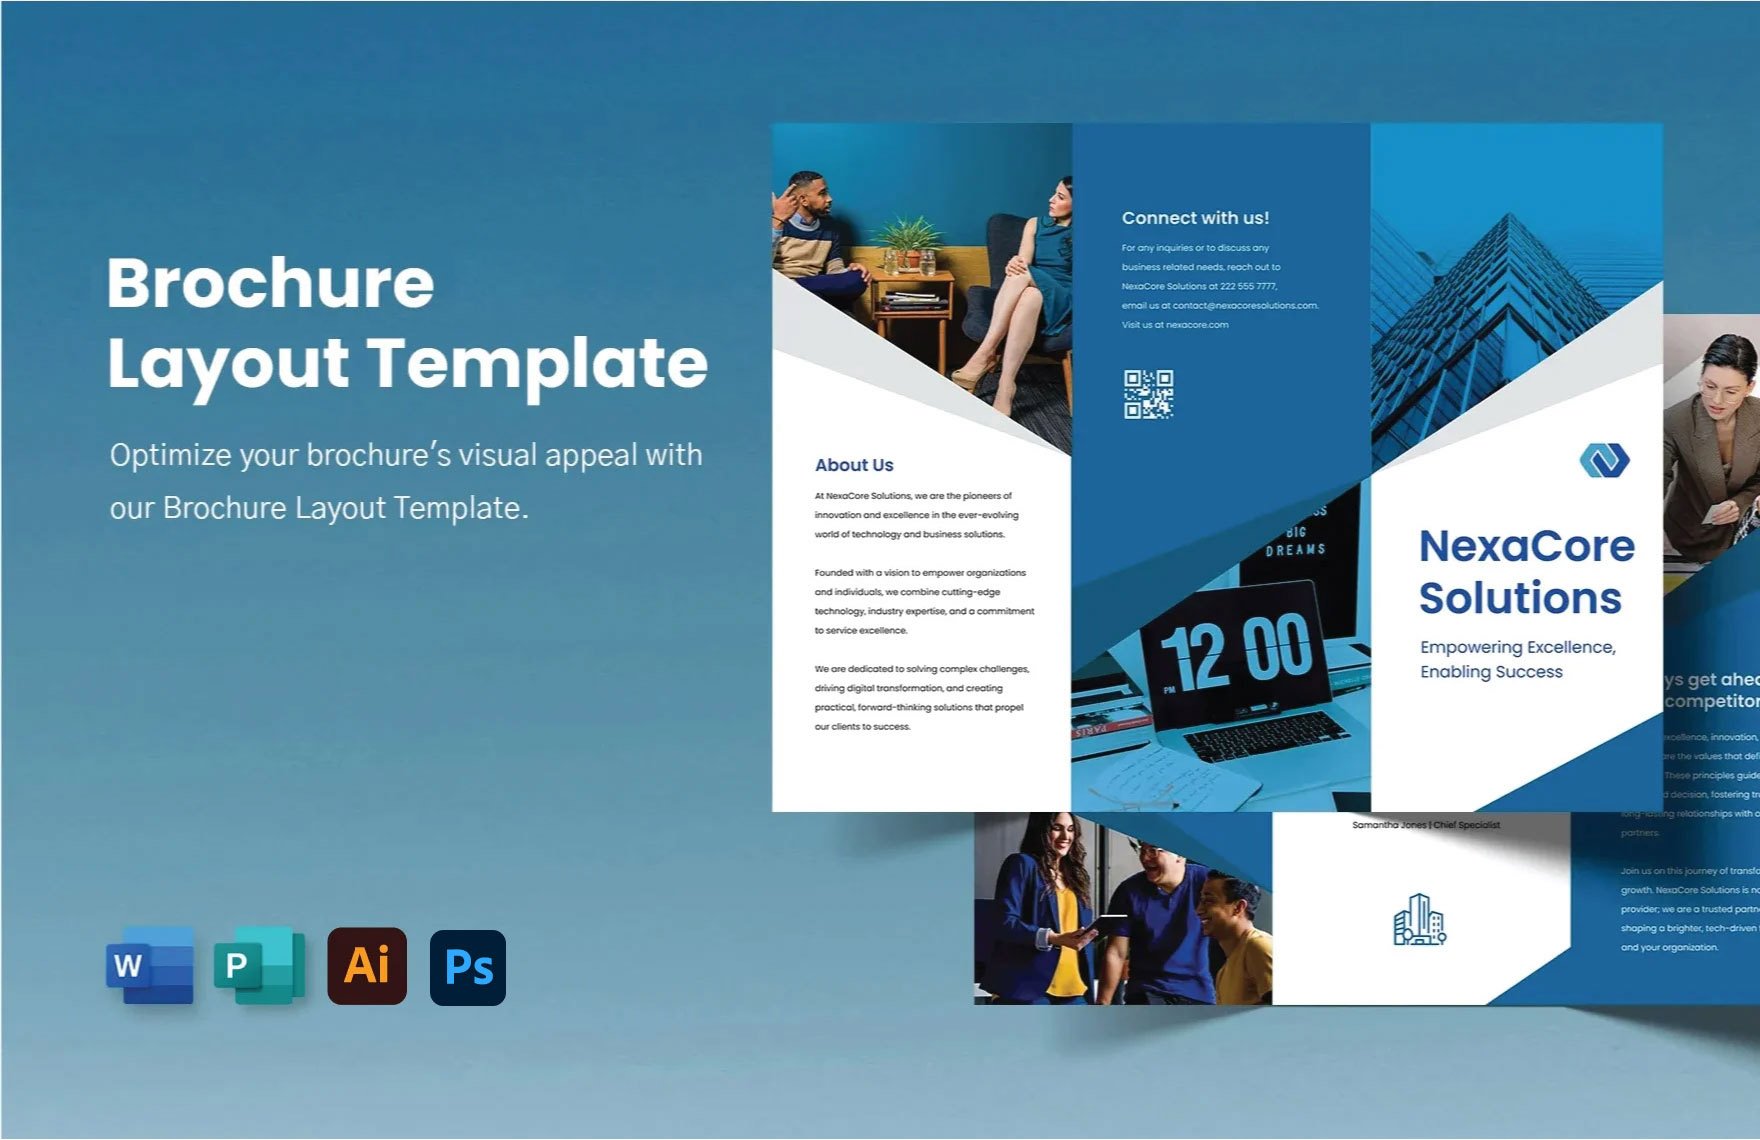 Free Brochure Layout Template in Word, Illustrator, PSD, Publisher